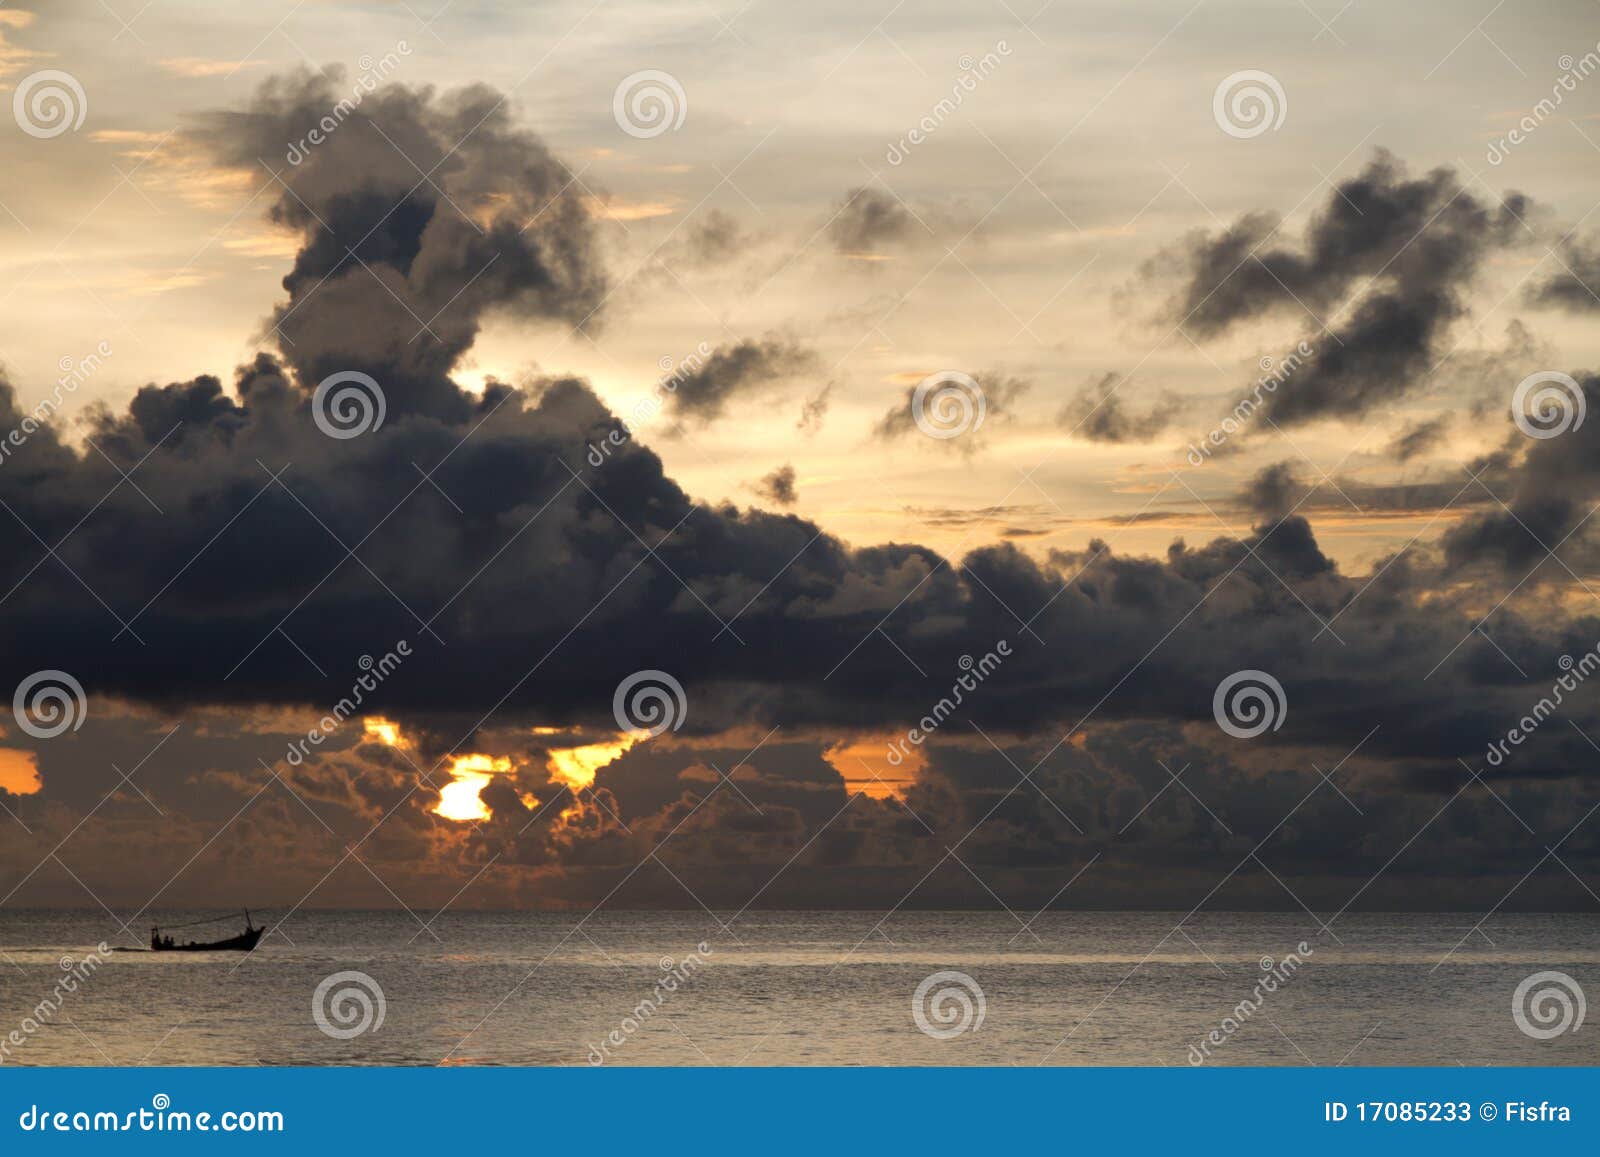 fishing boat with threatening clouds